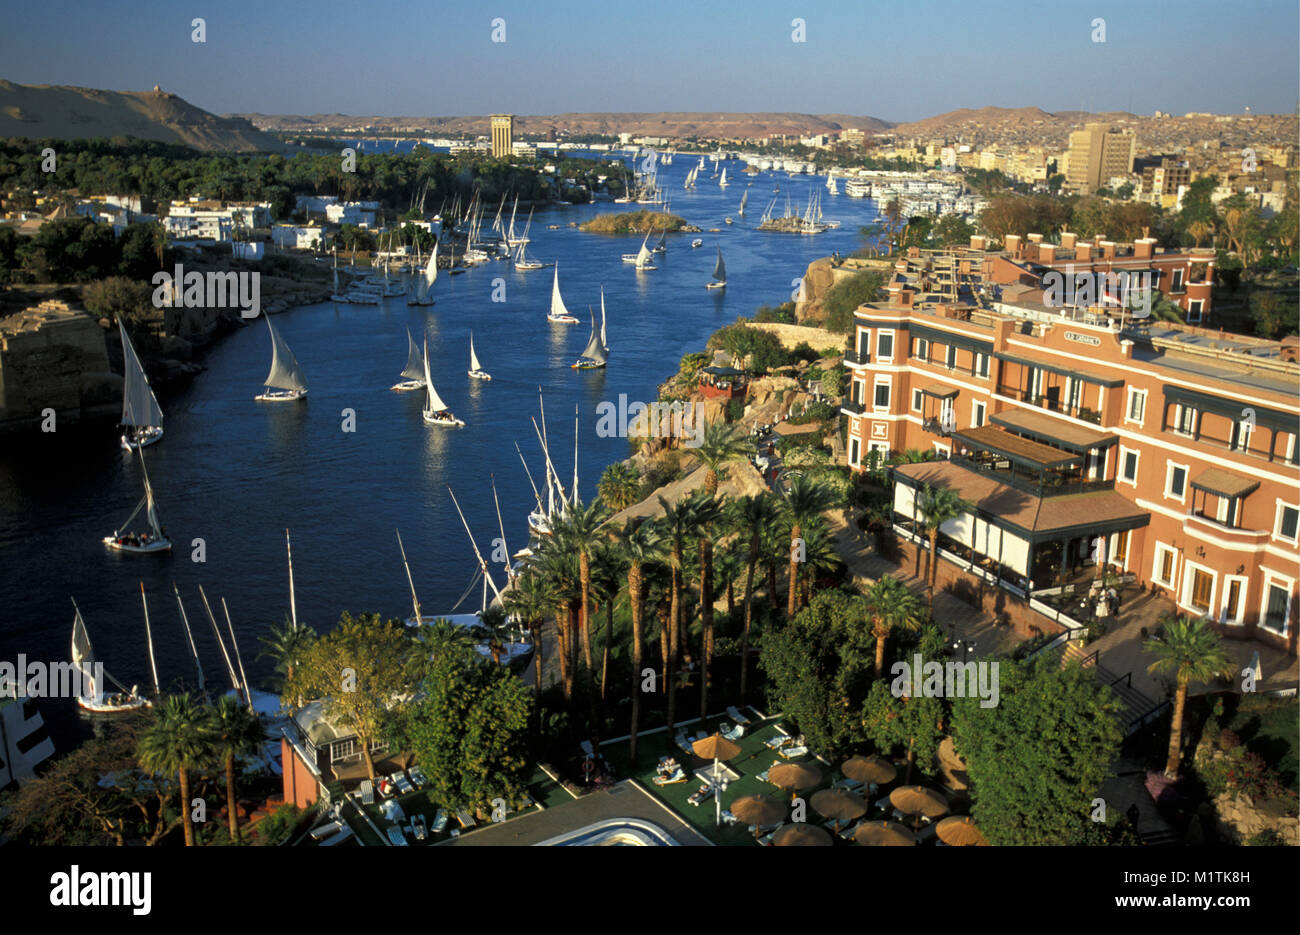 Egypt. Aswan. Nile river. Feluccas (traditional sailing ships). In front: The Old Cataract Hotel, famous and historic hotel. Stock Photo